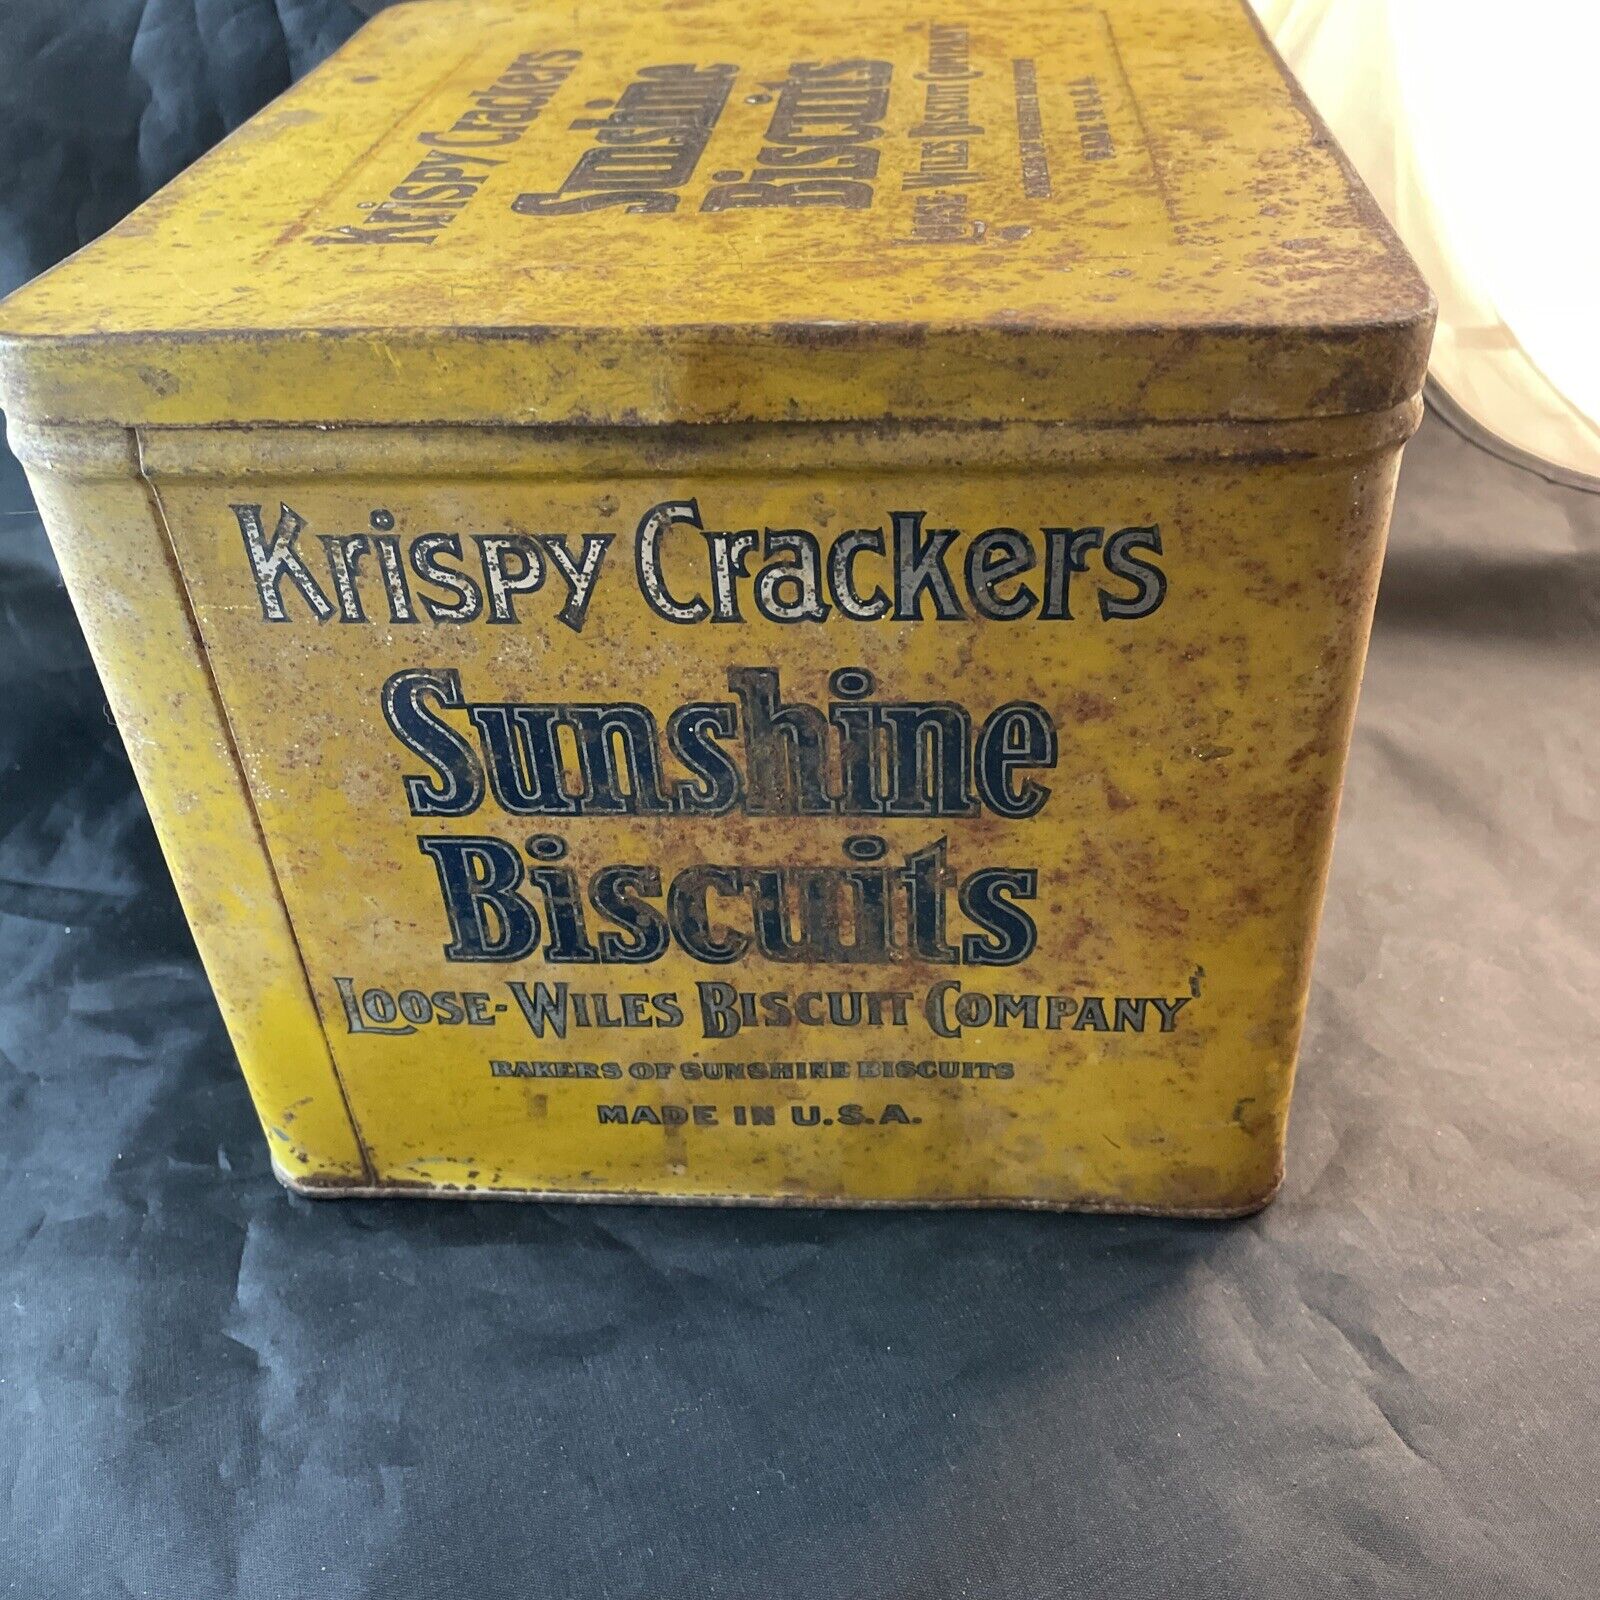 Collectible Krispy Crackers Sunshine Biscuits Tin - by Loose Wiles Biscuit Co.